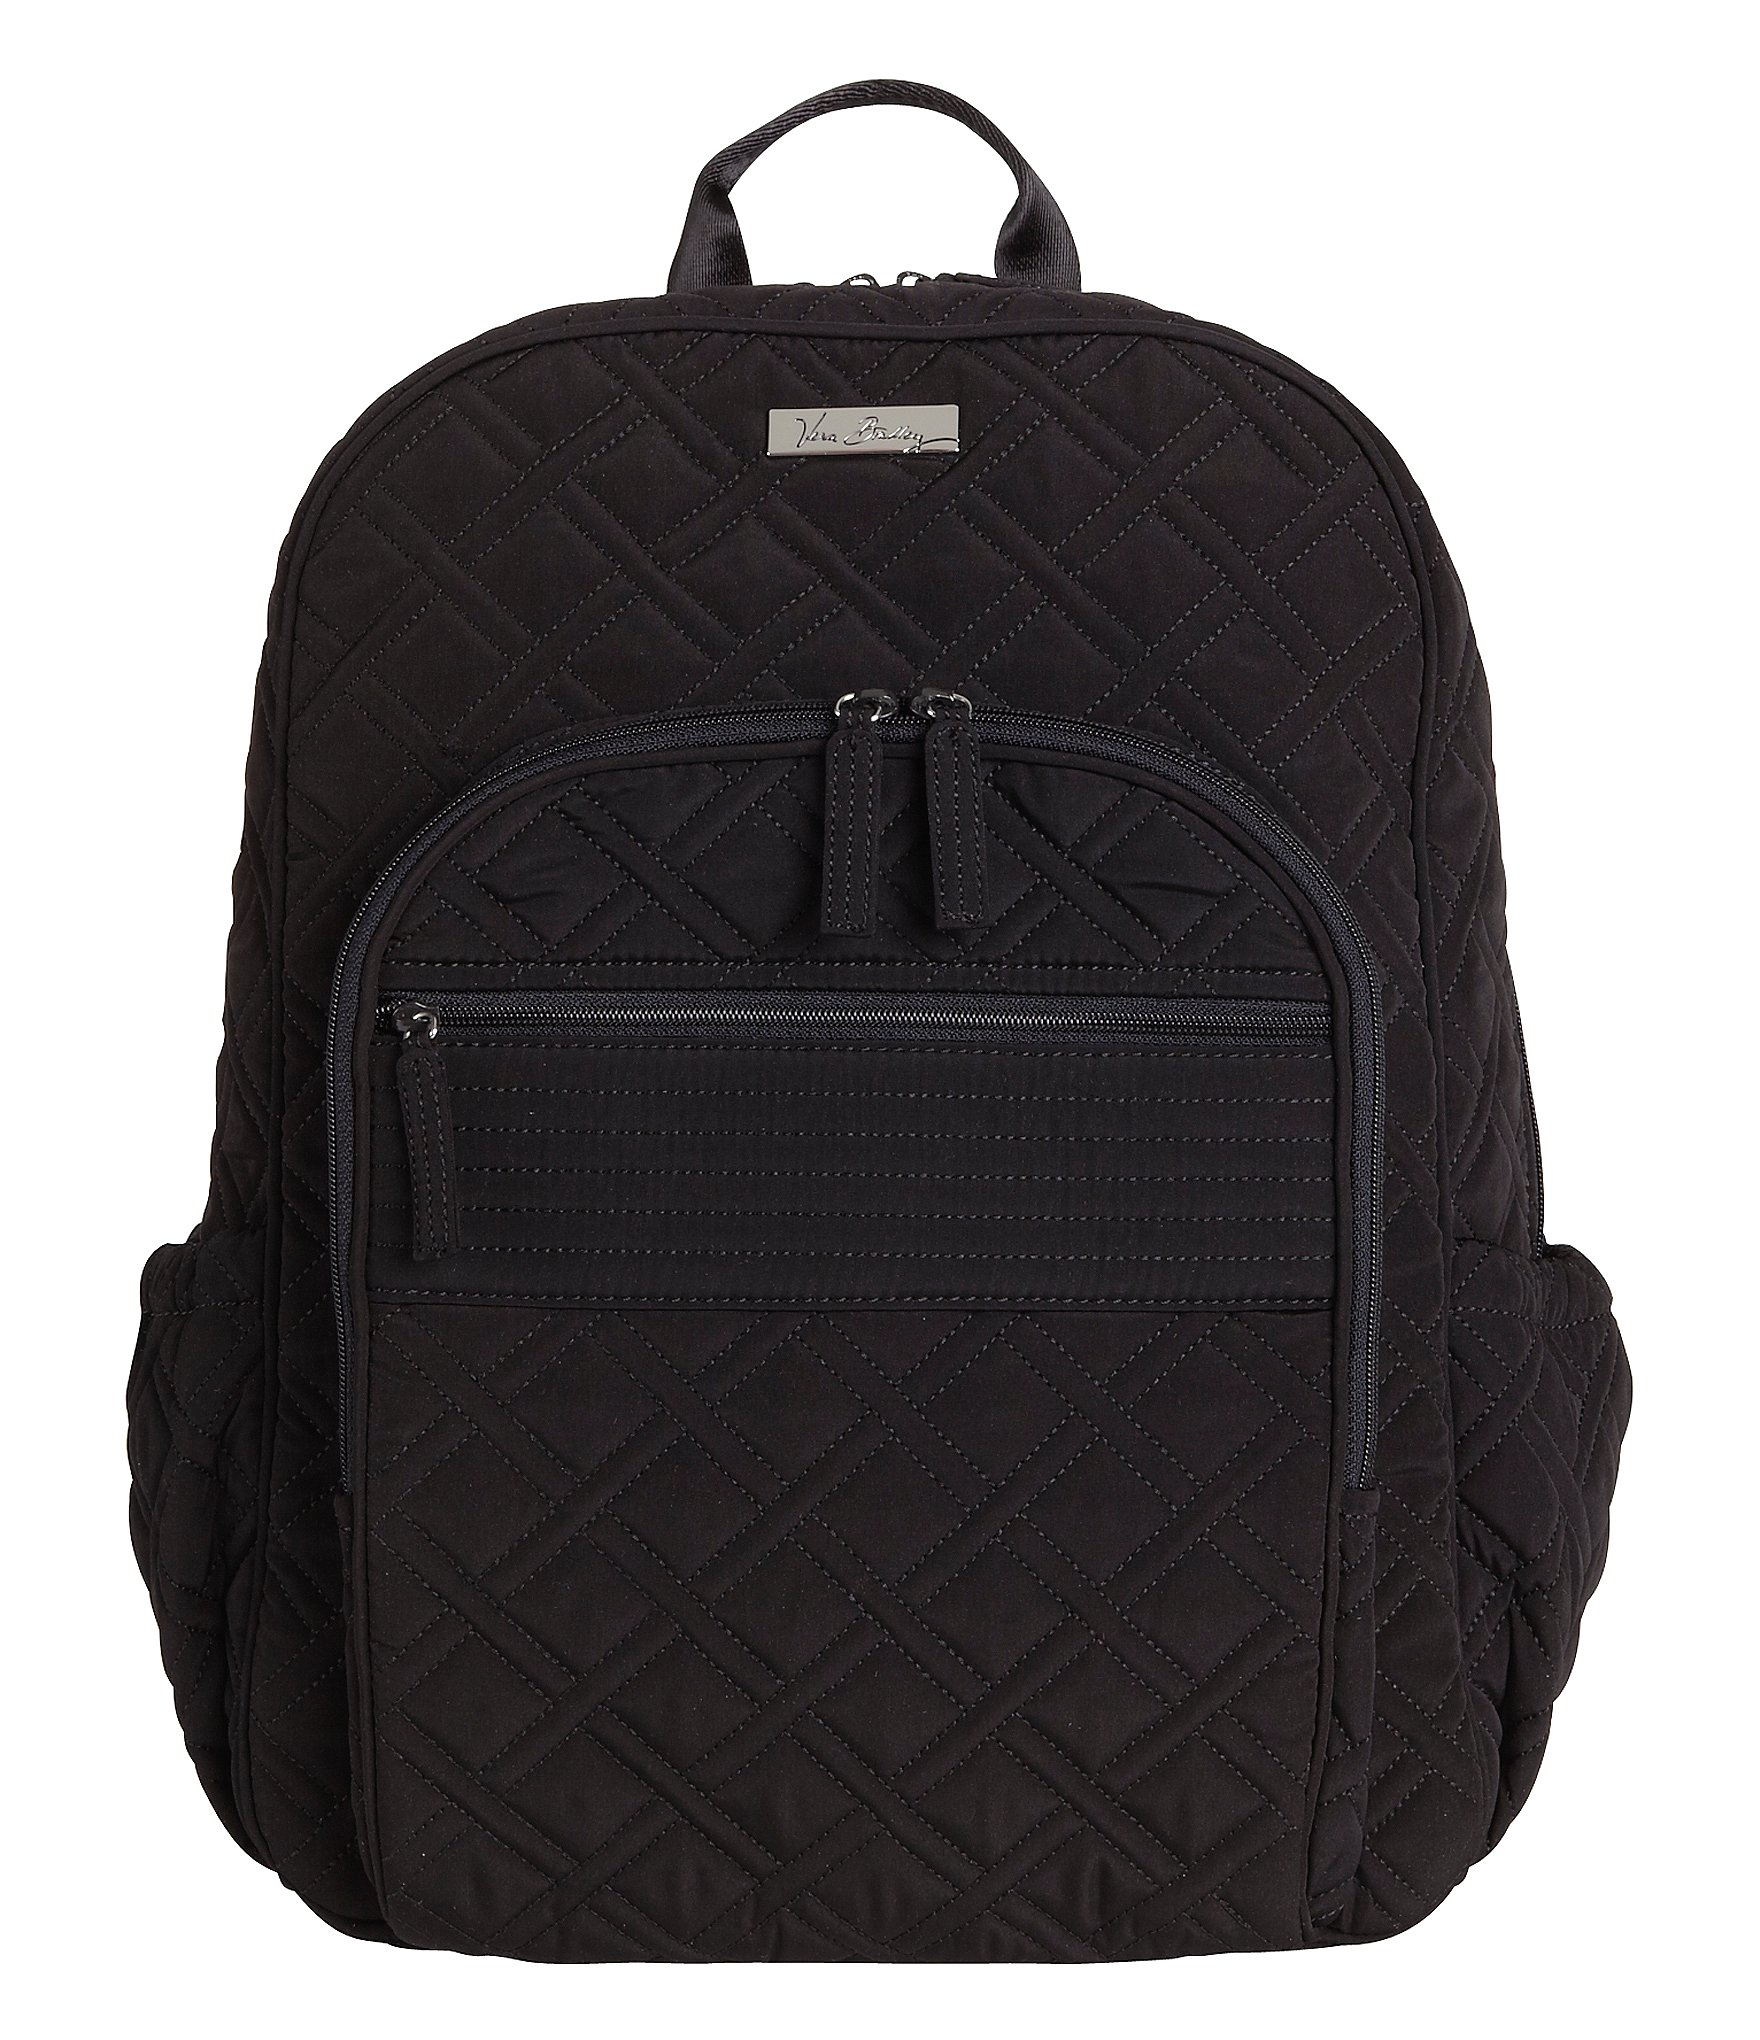 Vera Bradley Quilted Campus Backpack in Black - Lyst